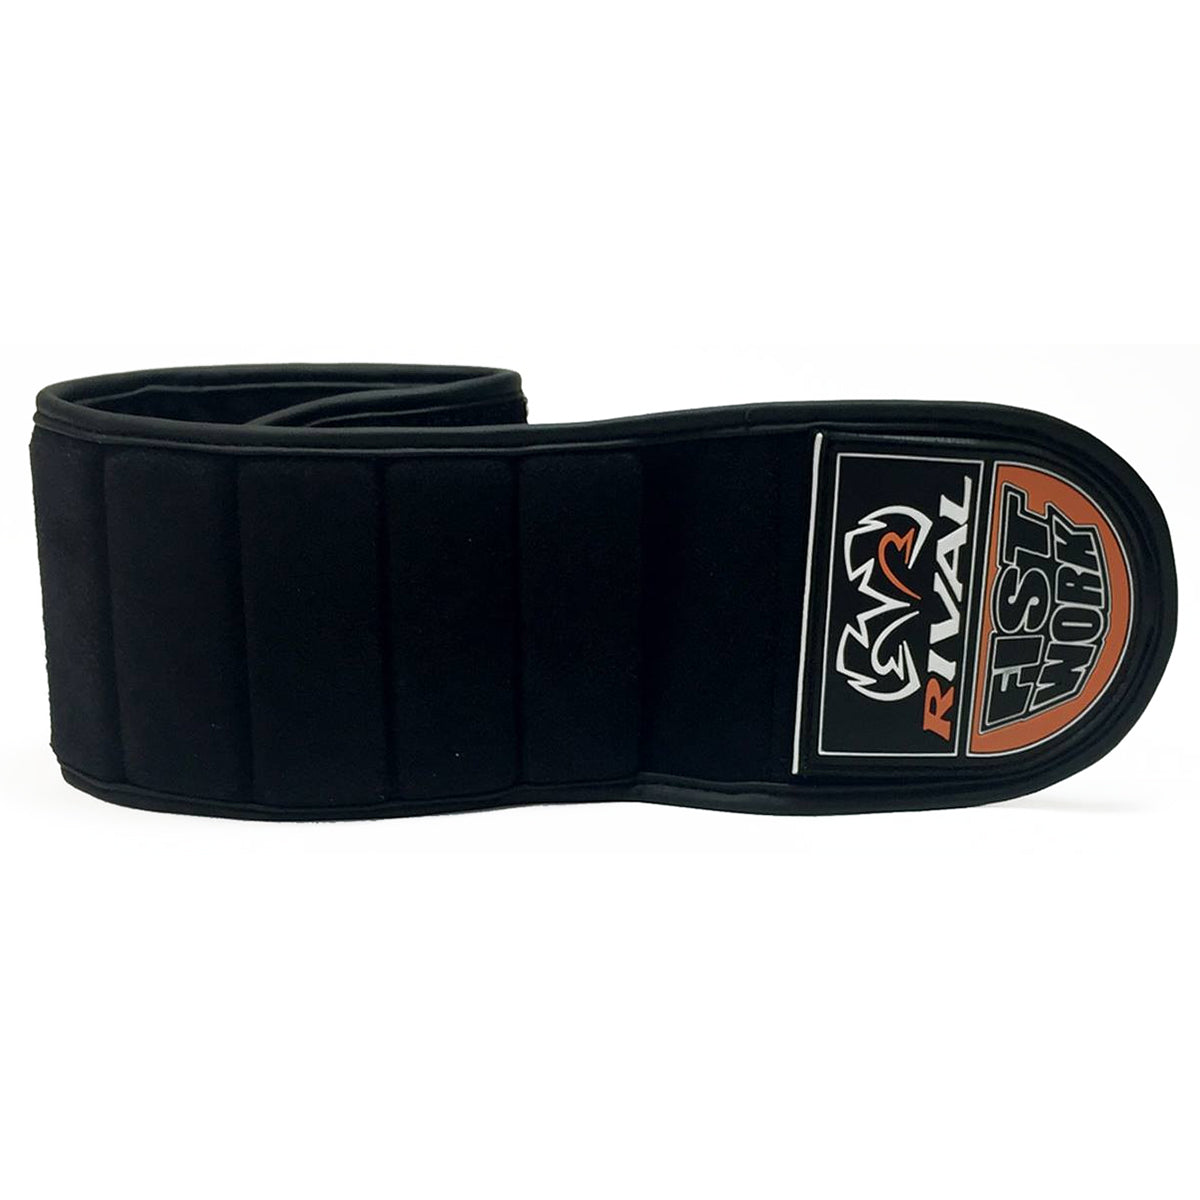 RIVAL Boxing FistWork Gauntlet Weighted Strap Extensions RIVAL